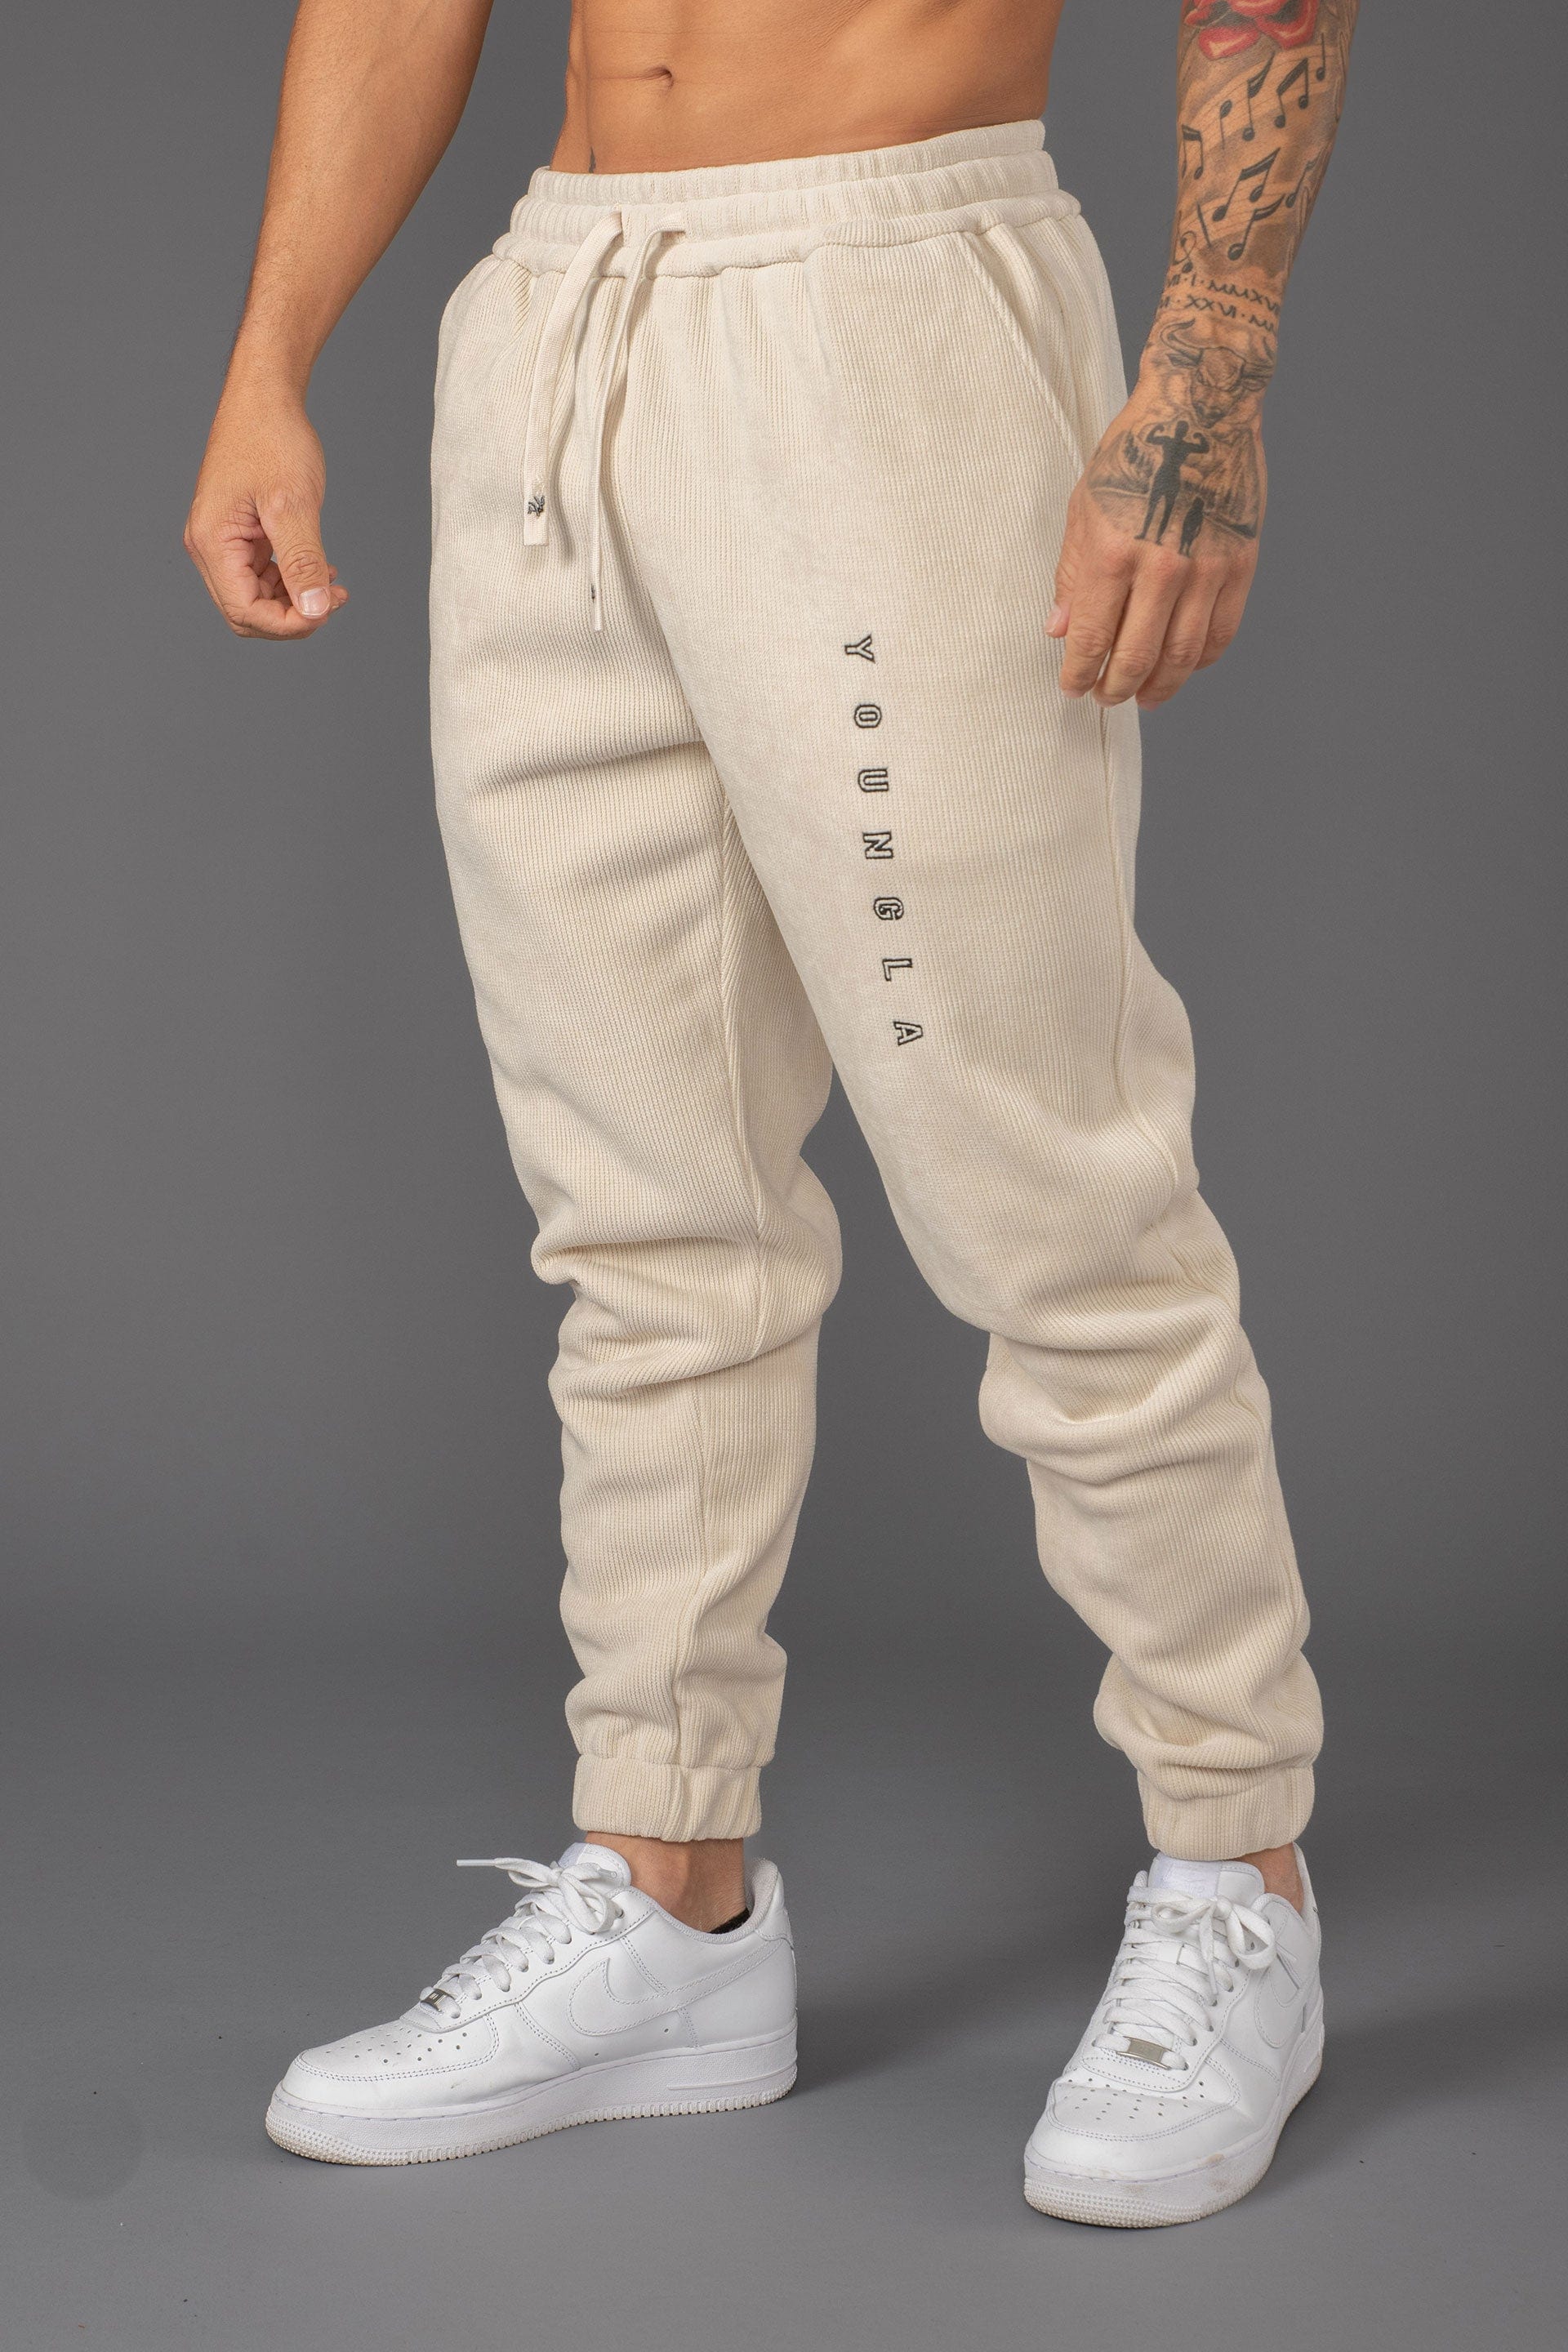 Buy YoungLA Slim Fit Joggers for Men, French Terry Cotton Skinny Tapered  Sweatpants